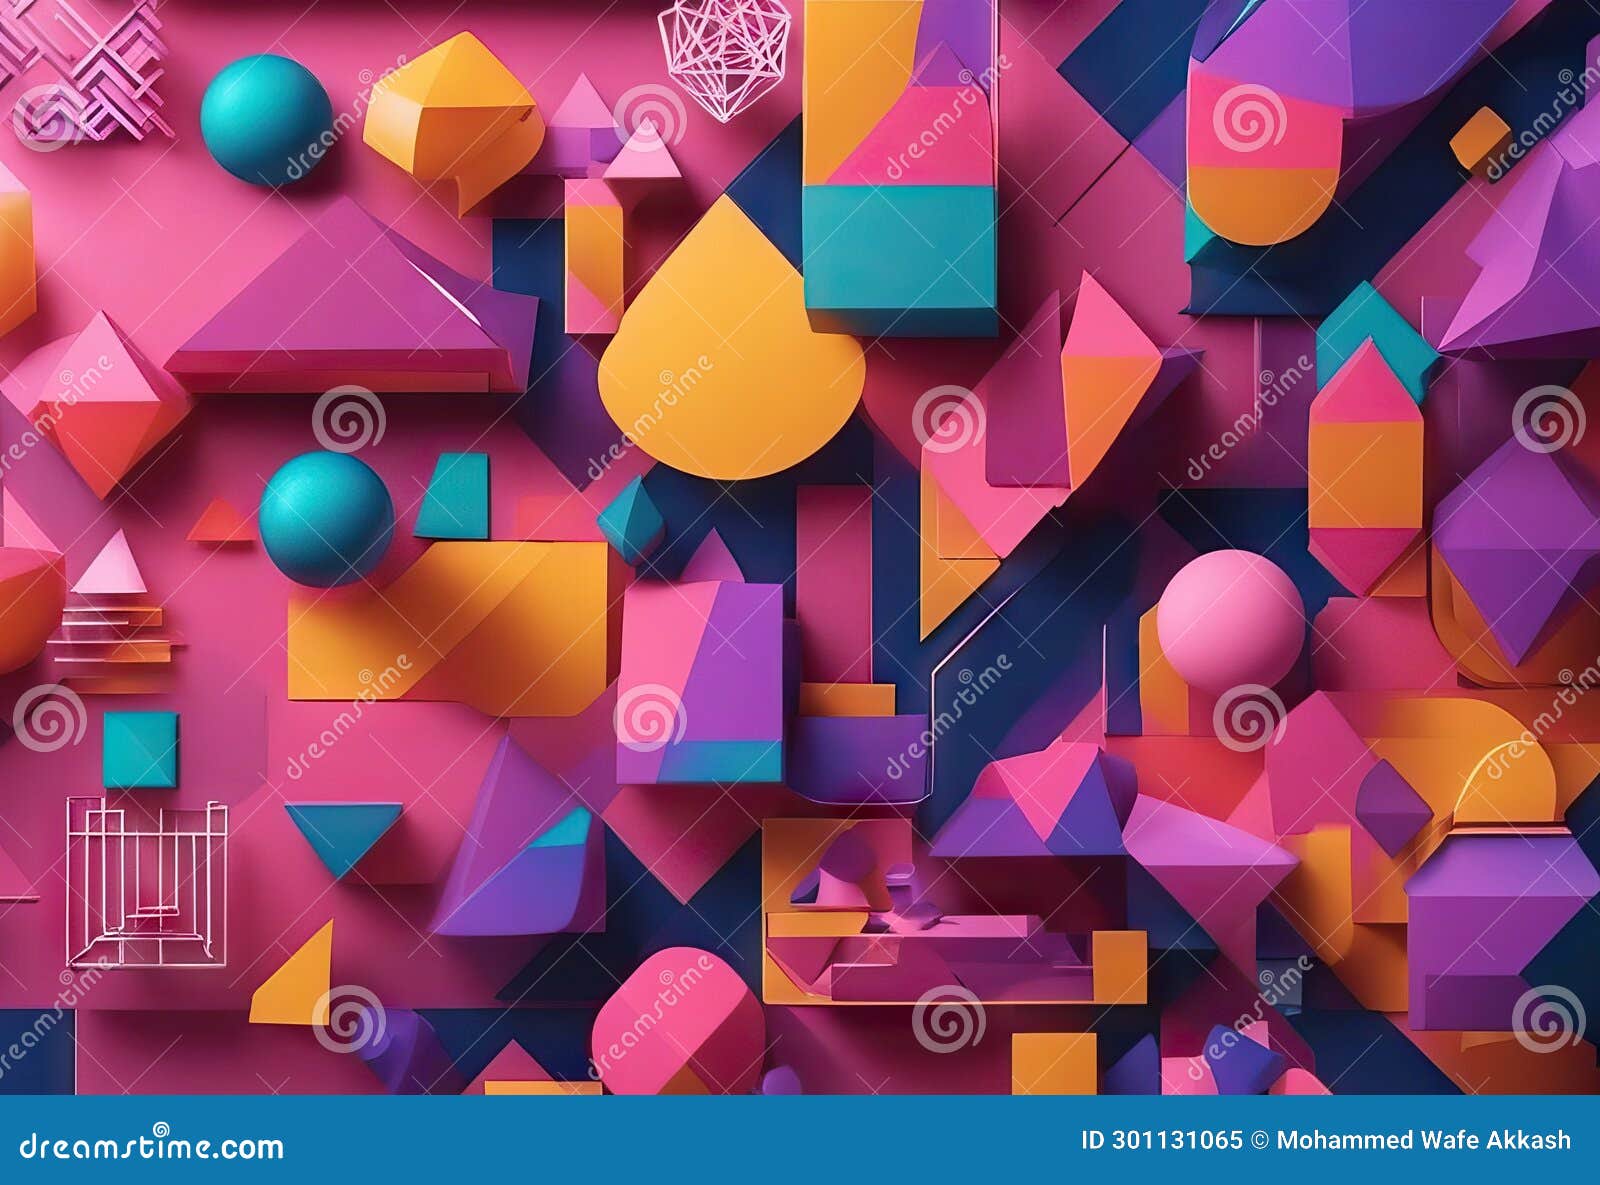 colorful 90s style geometric  set stock 1990-1999, 1980-1989, , backgrounds